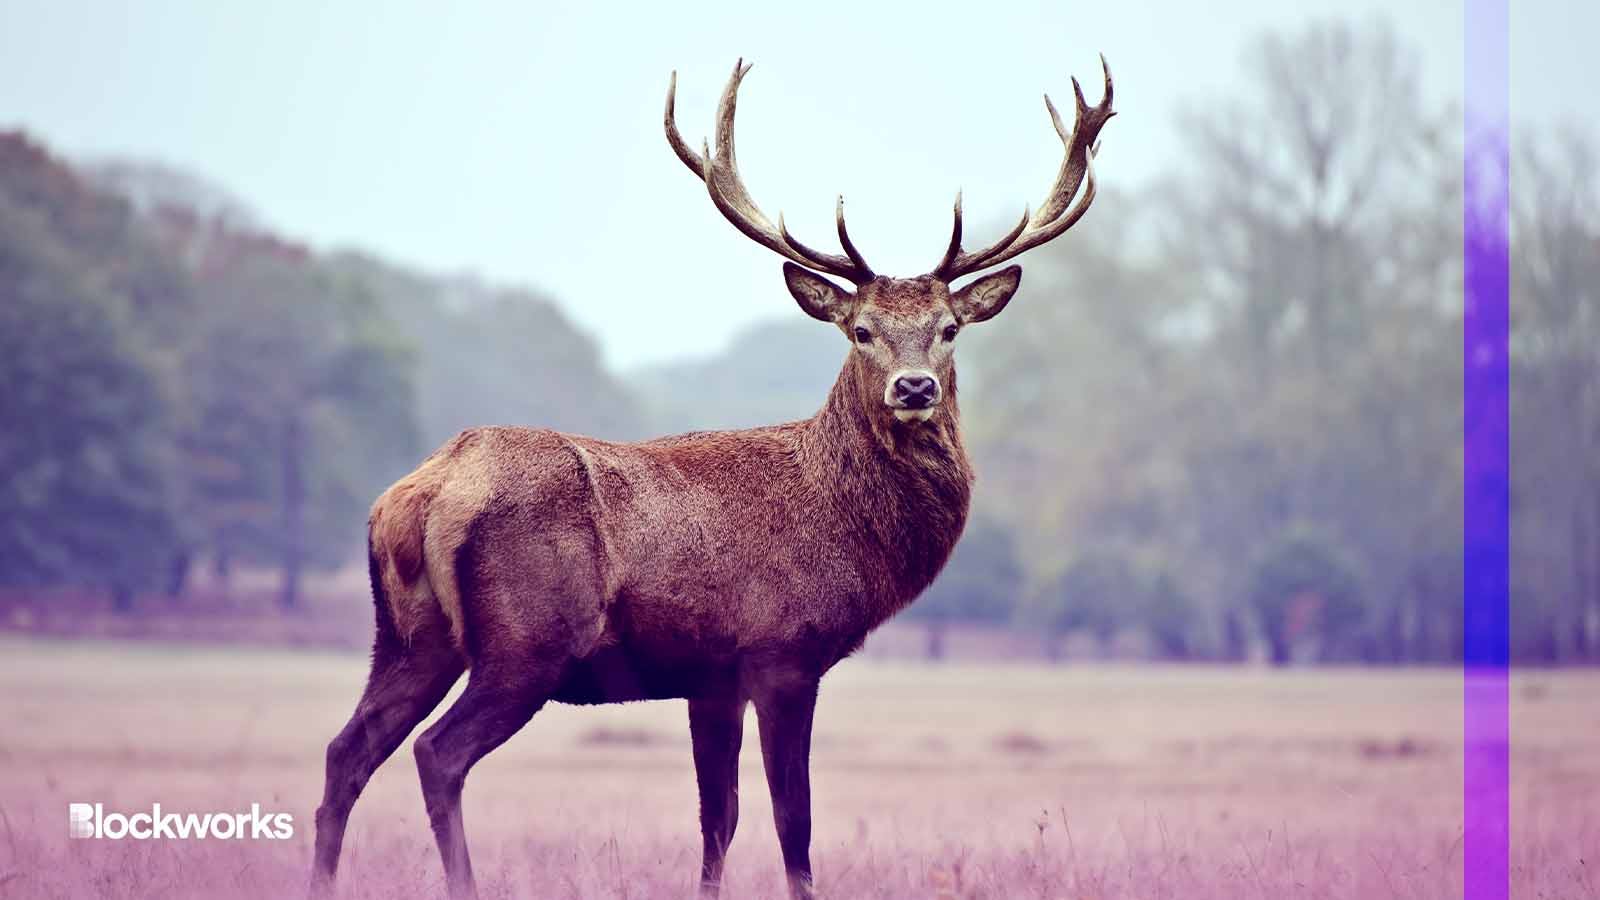 Potential world-record deer antlers could be worth $100,000